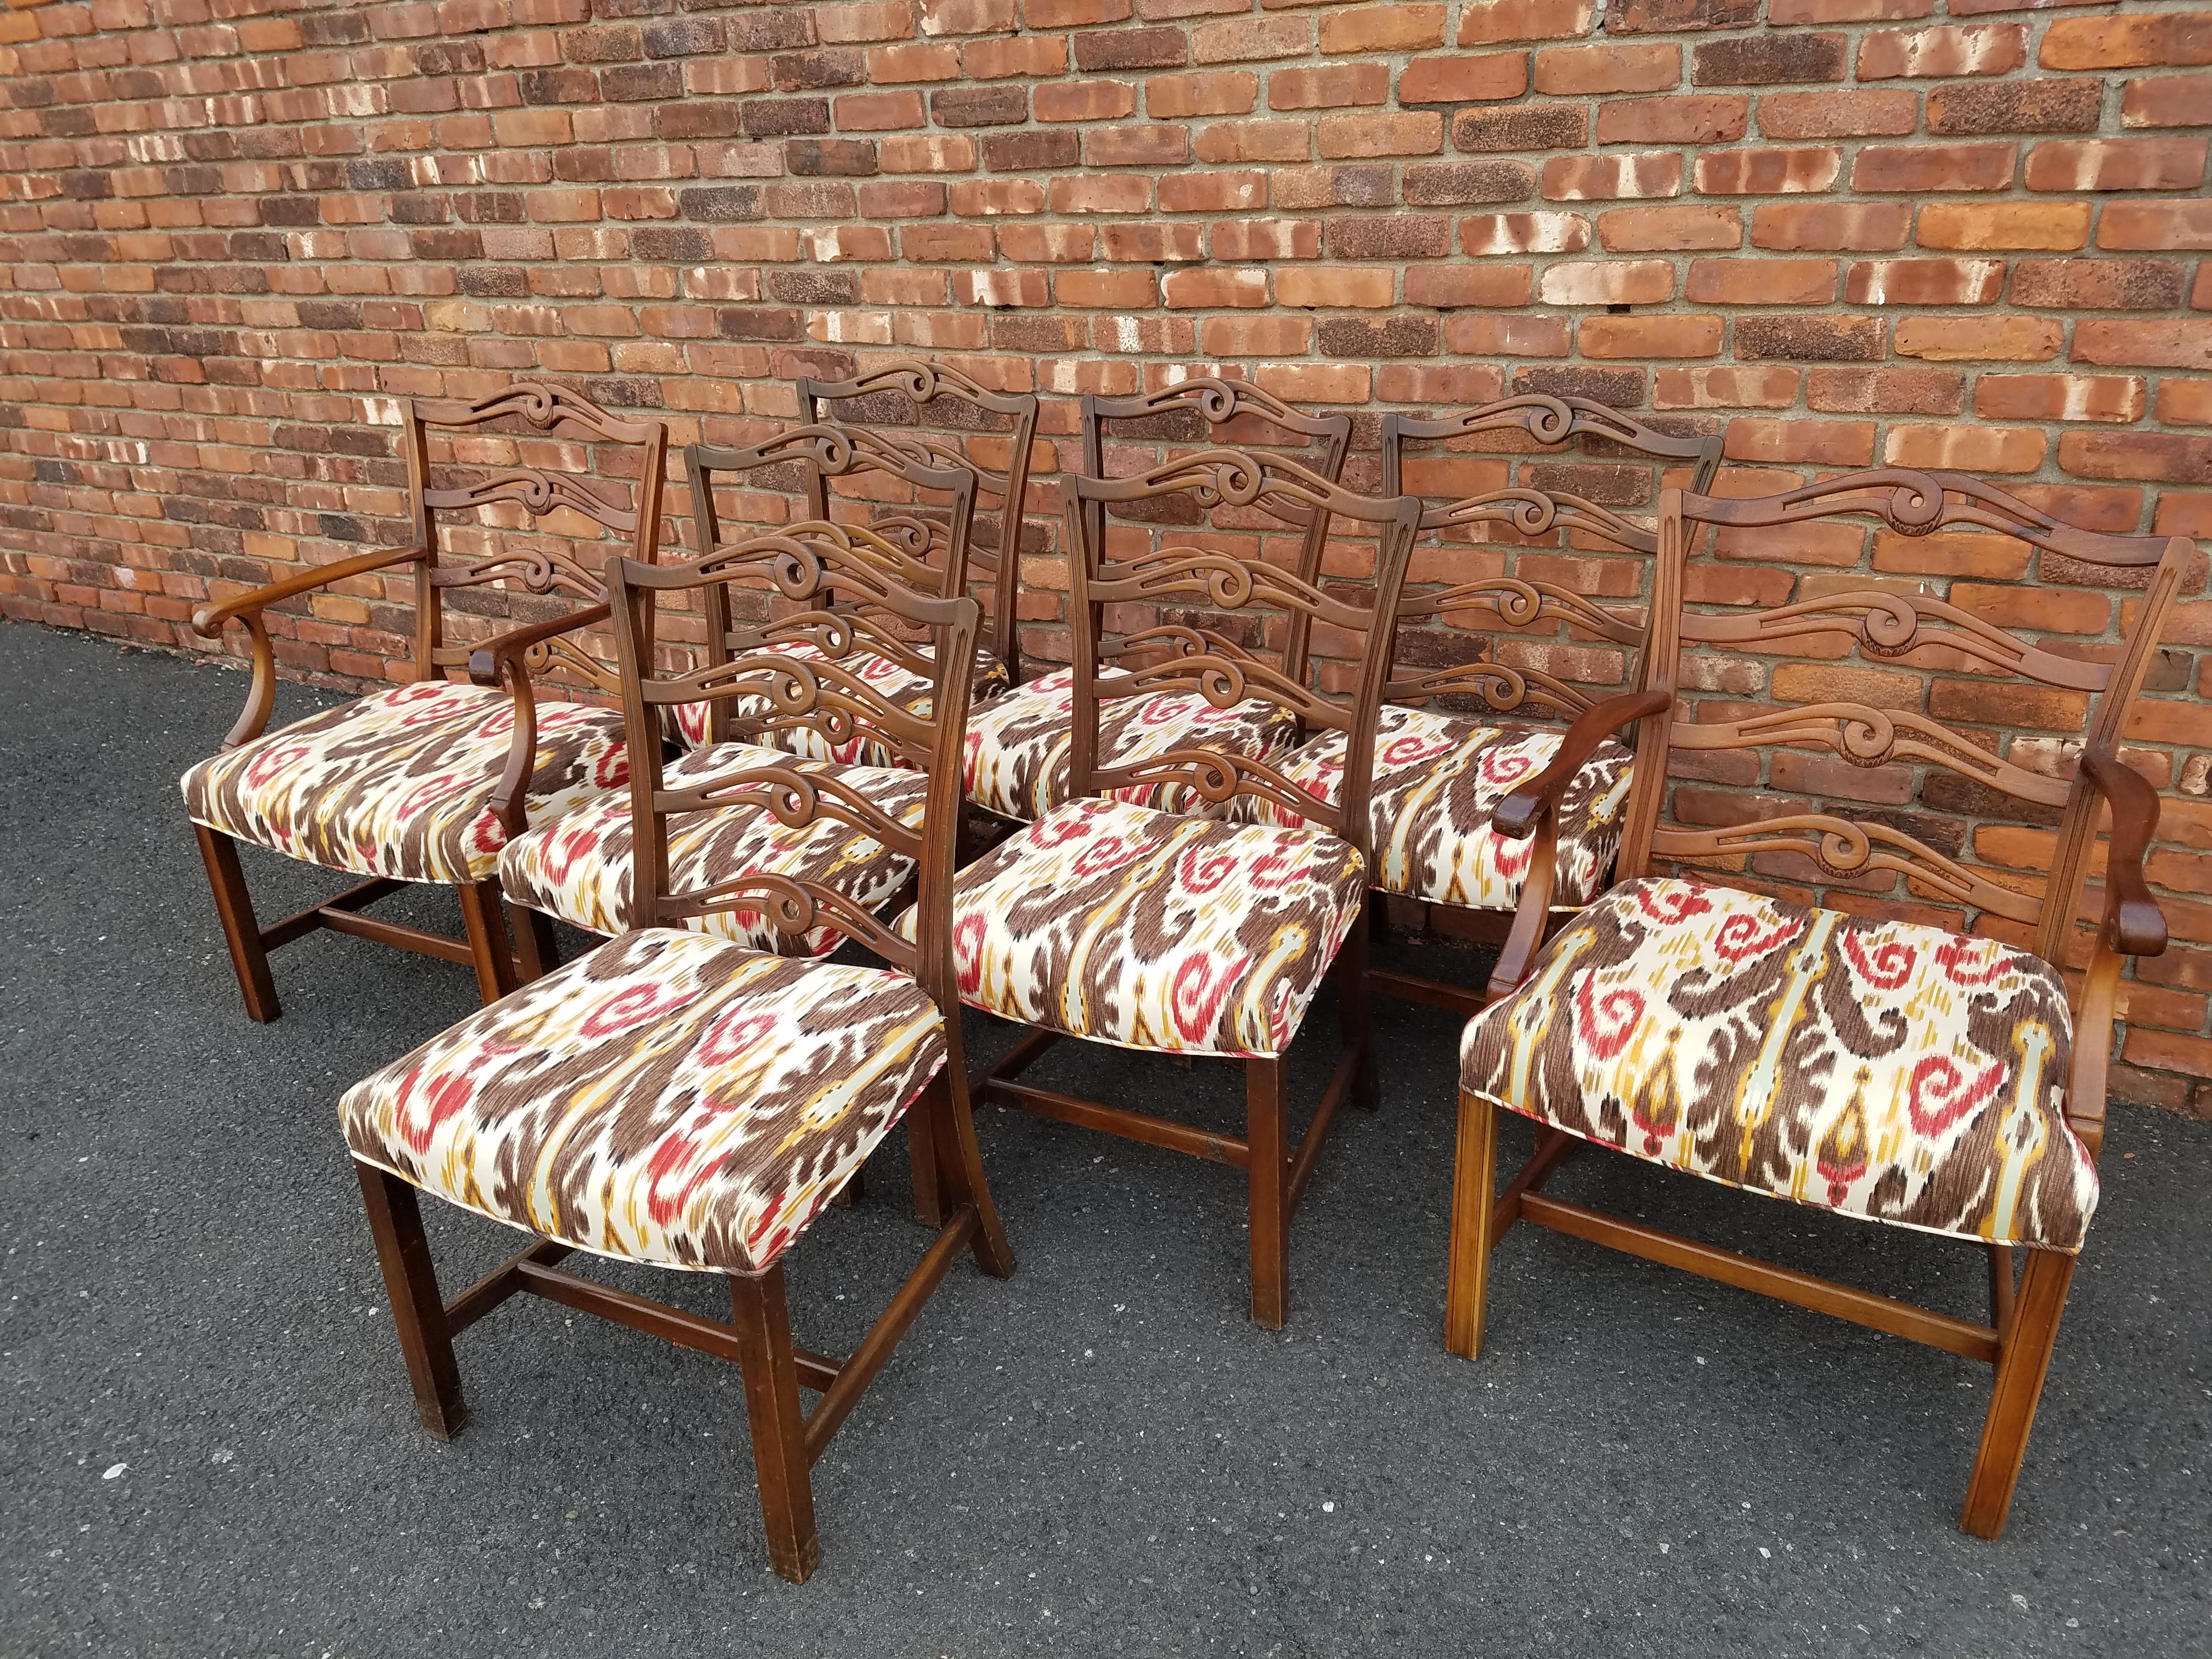 Set of 8 vintage American walnut dining chairs. 2 armchairs and 6 side chairs. Newley reupholstered and refilled using a transitional cotton design in red, gold, brown on a white background. There are no rips or stains in the upholstery. Nice and